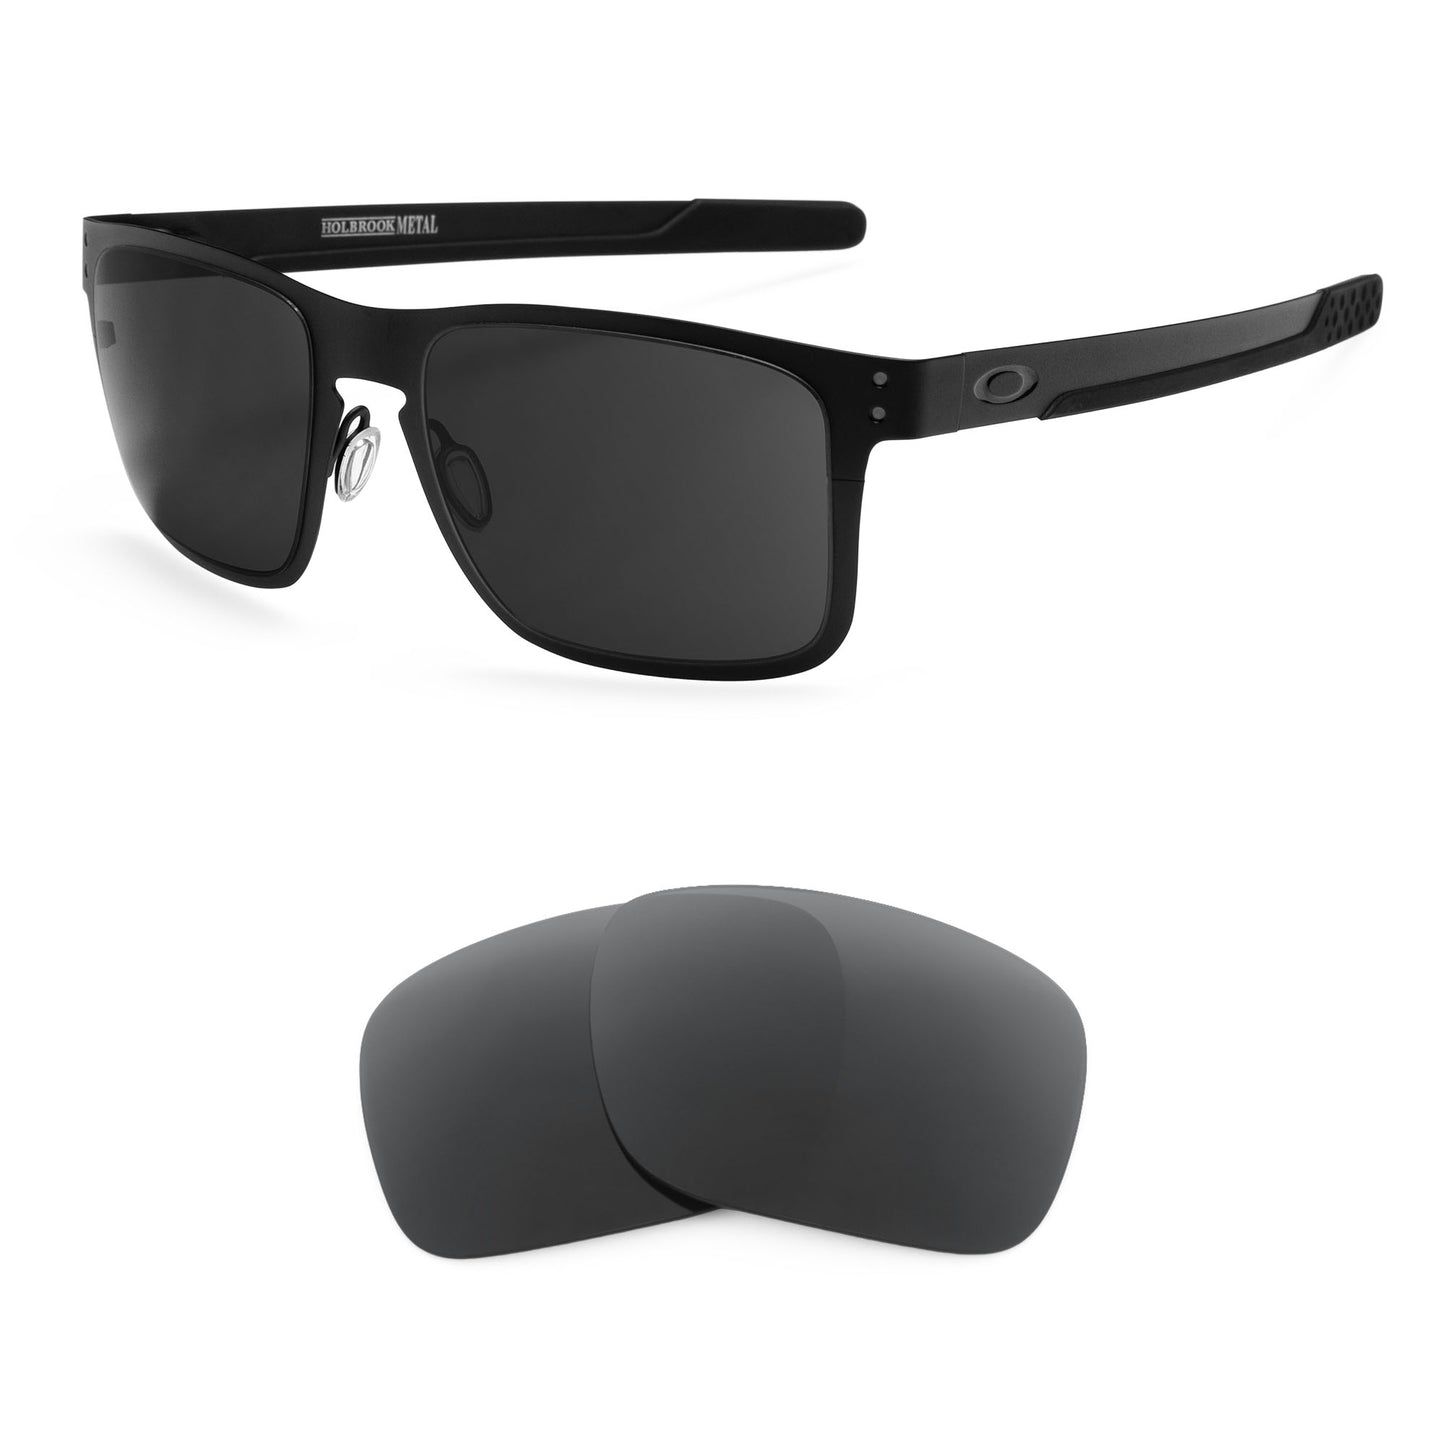 Oakley Holbrook Metal sunglasses with replacement lenses